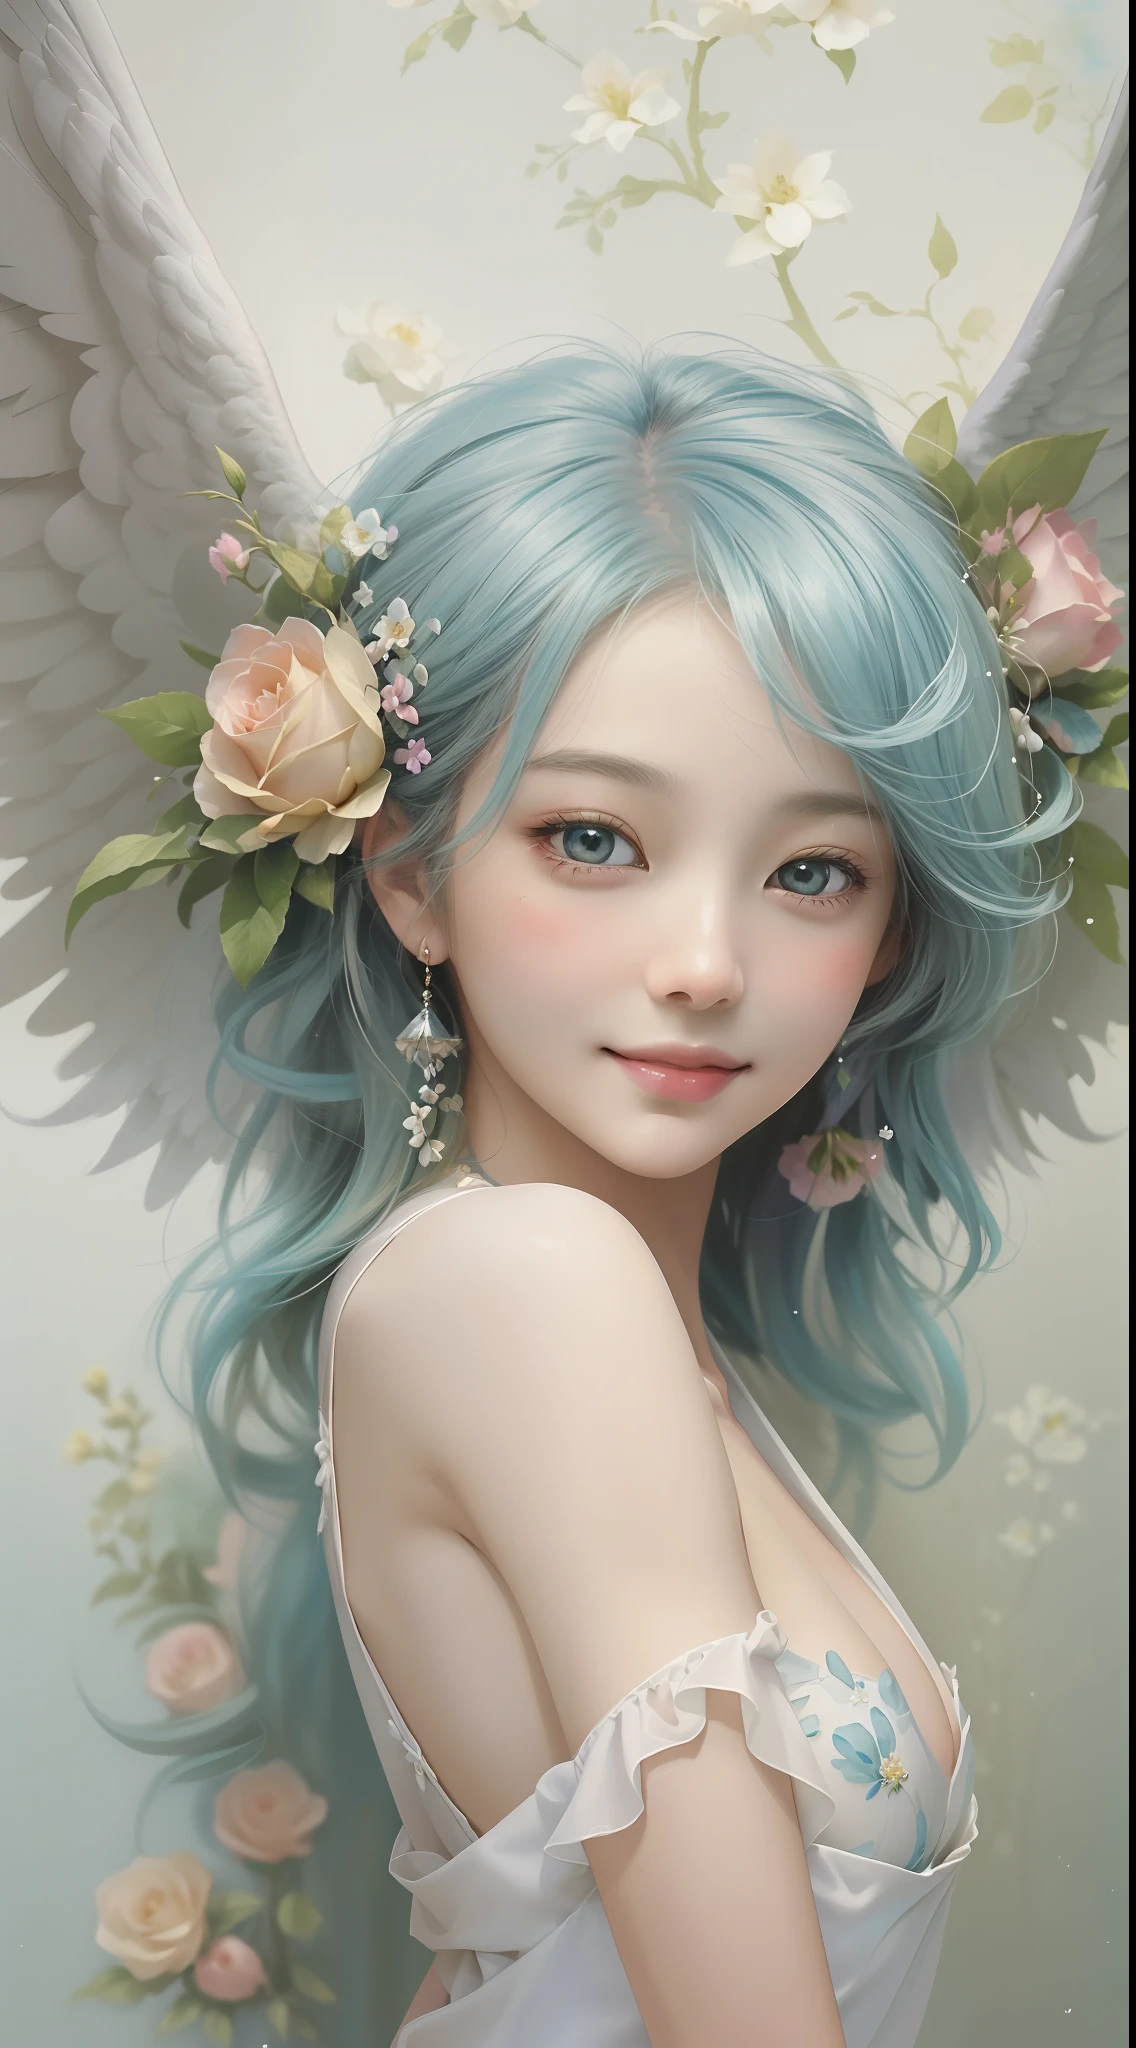 (Angel wings、😇、a smile、😌🥰Archaic Smile).hyper realstic、Ultra-realistic、Depiction of the human body without distortion、(((Totally  naked angel))),(( Showing breast))、Woman in the Arms、Near and far law、Three-dimensional、Contemporary painting、world masterpiece、collection、Homage to the art or artist work of Picasso and Renoir, Not sentimental、Excellent portrayal、Gentle expression、More detailed character faces, Serious competition、Compositions like paintings、(Konmutsuki_Gacha_Series 1, punk_rosette), Realistic、Delicate brushwork、aqua color flowers, (Full body, elegant flowers background)